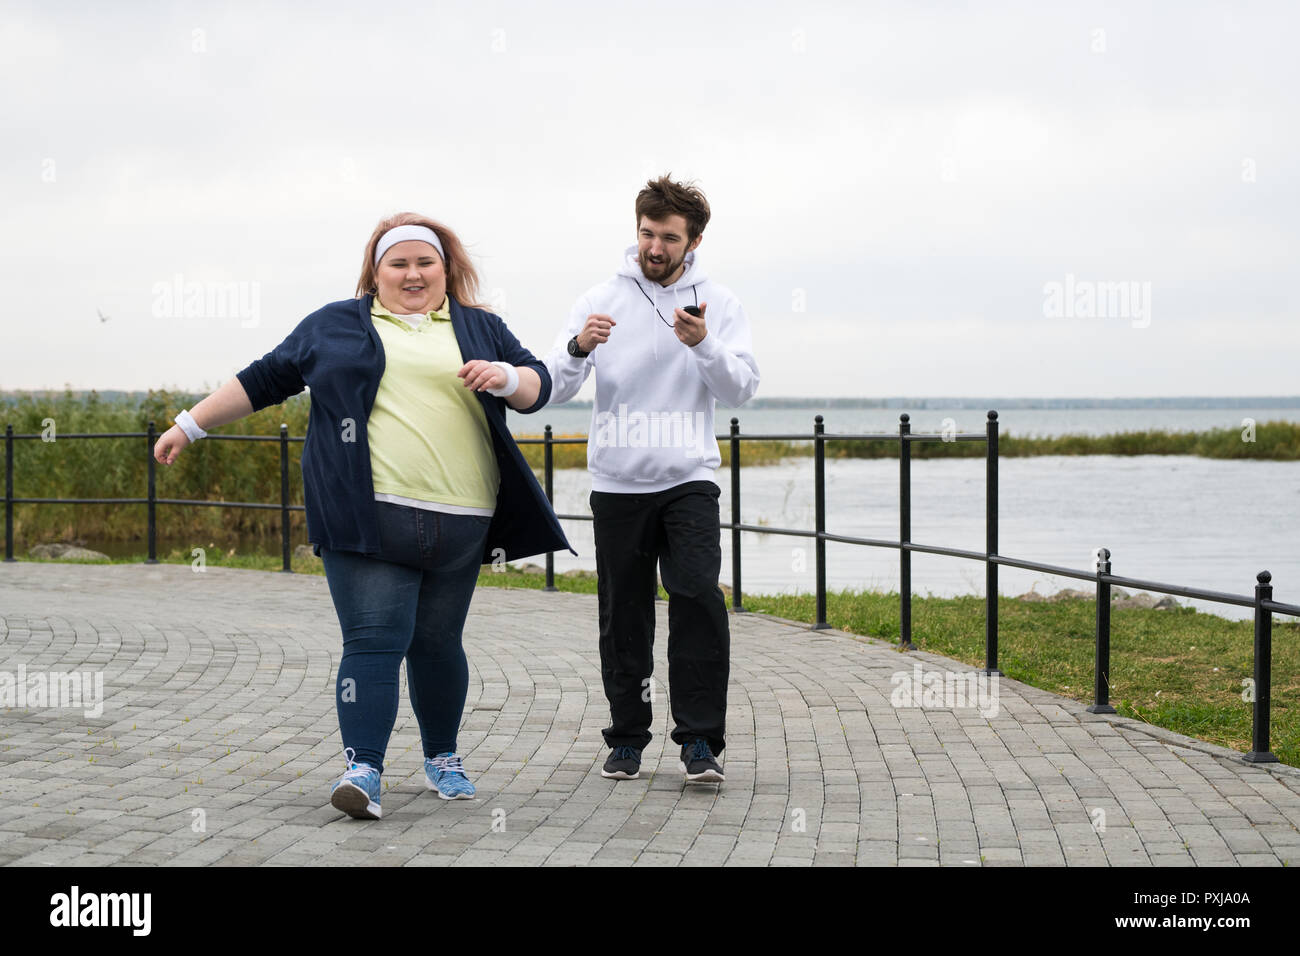 Obese Woman Running in Park Stock Photo